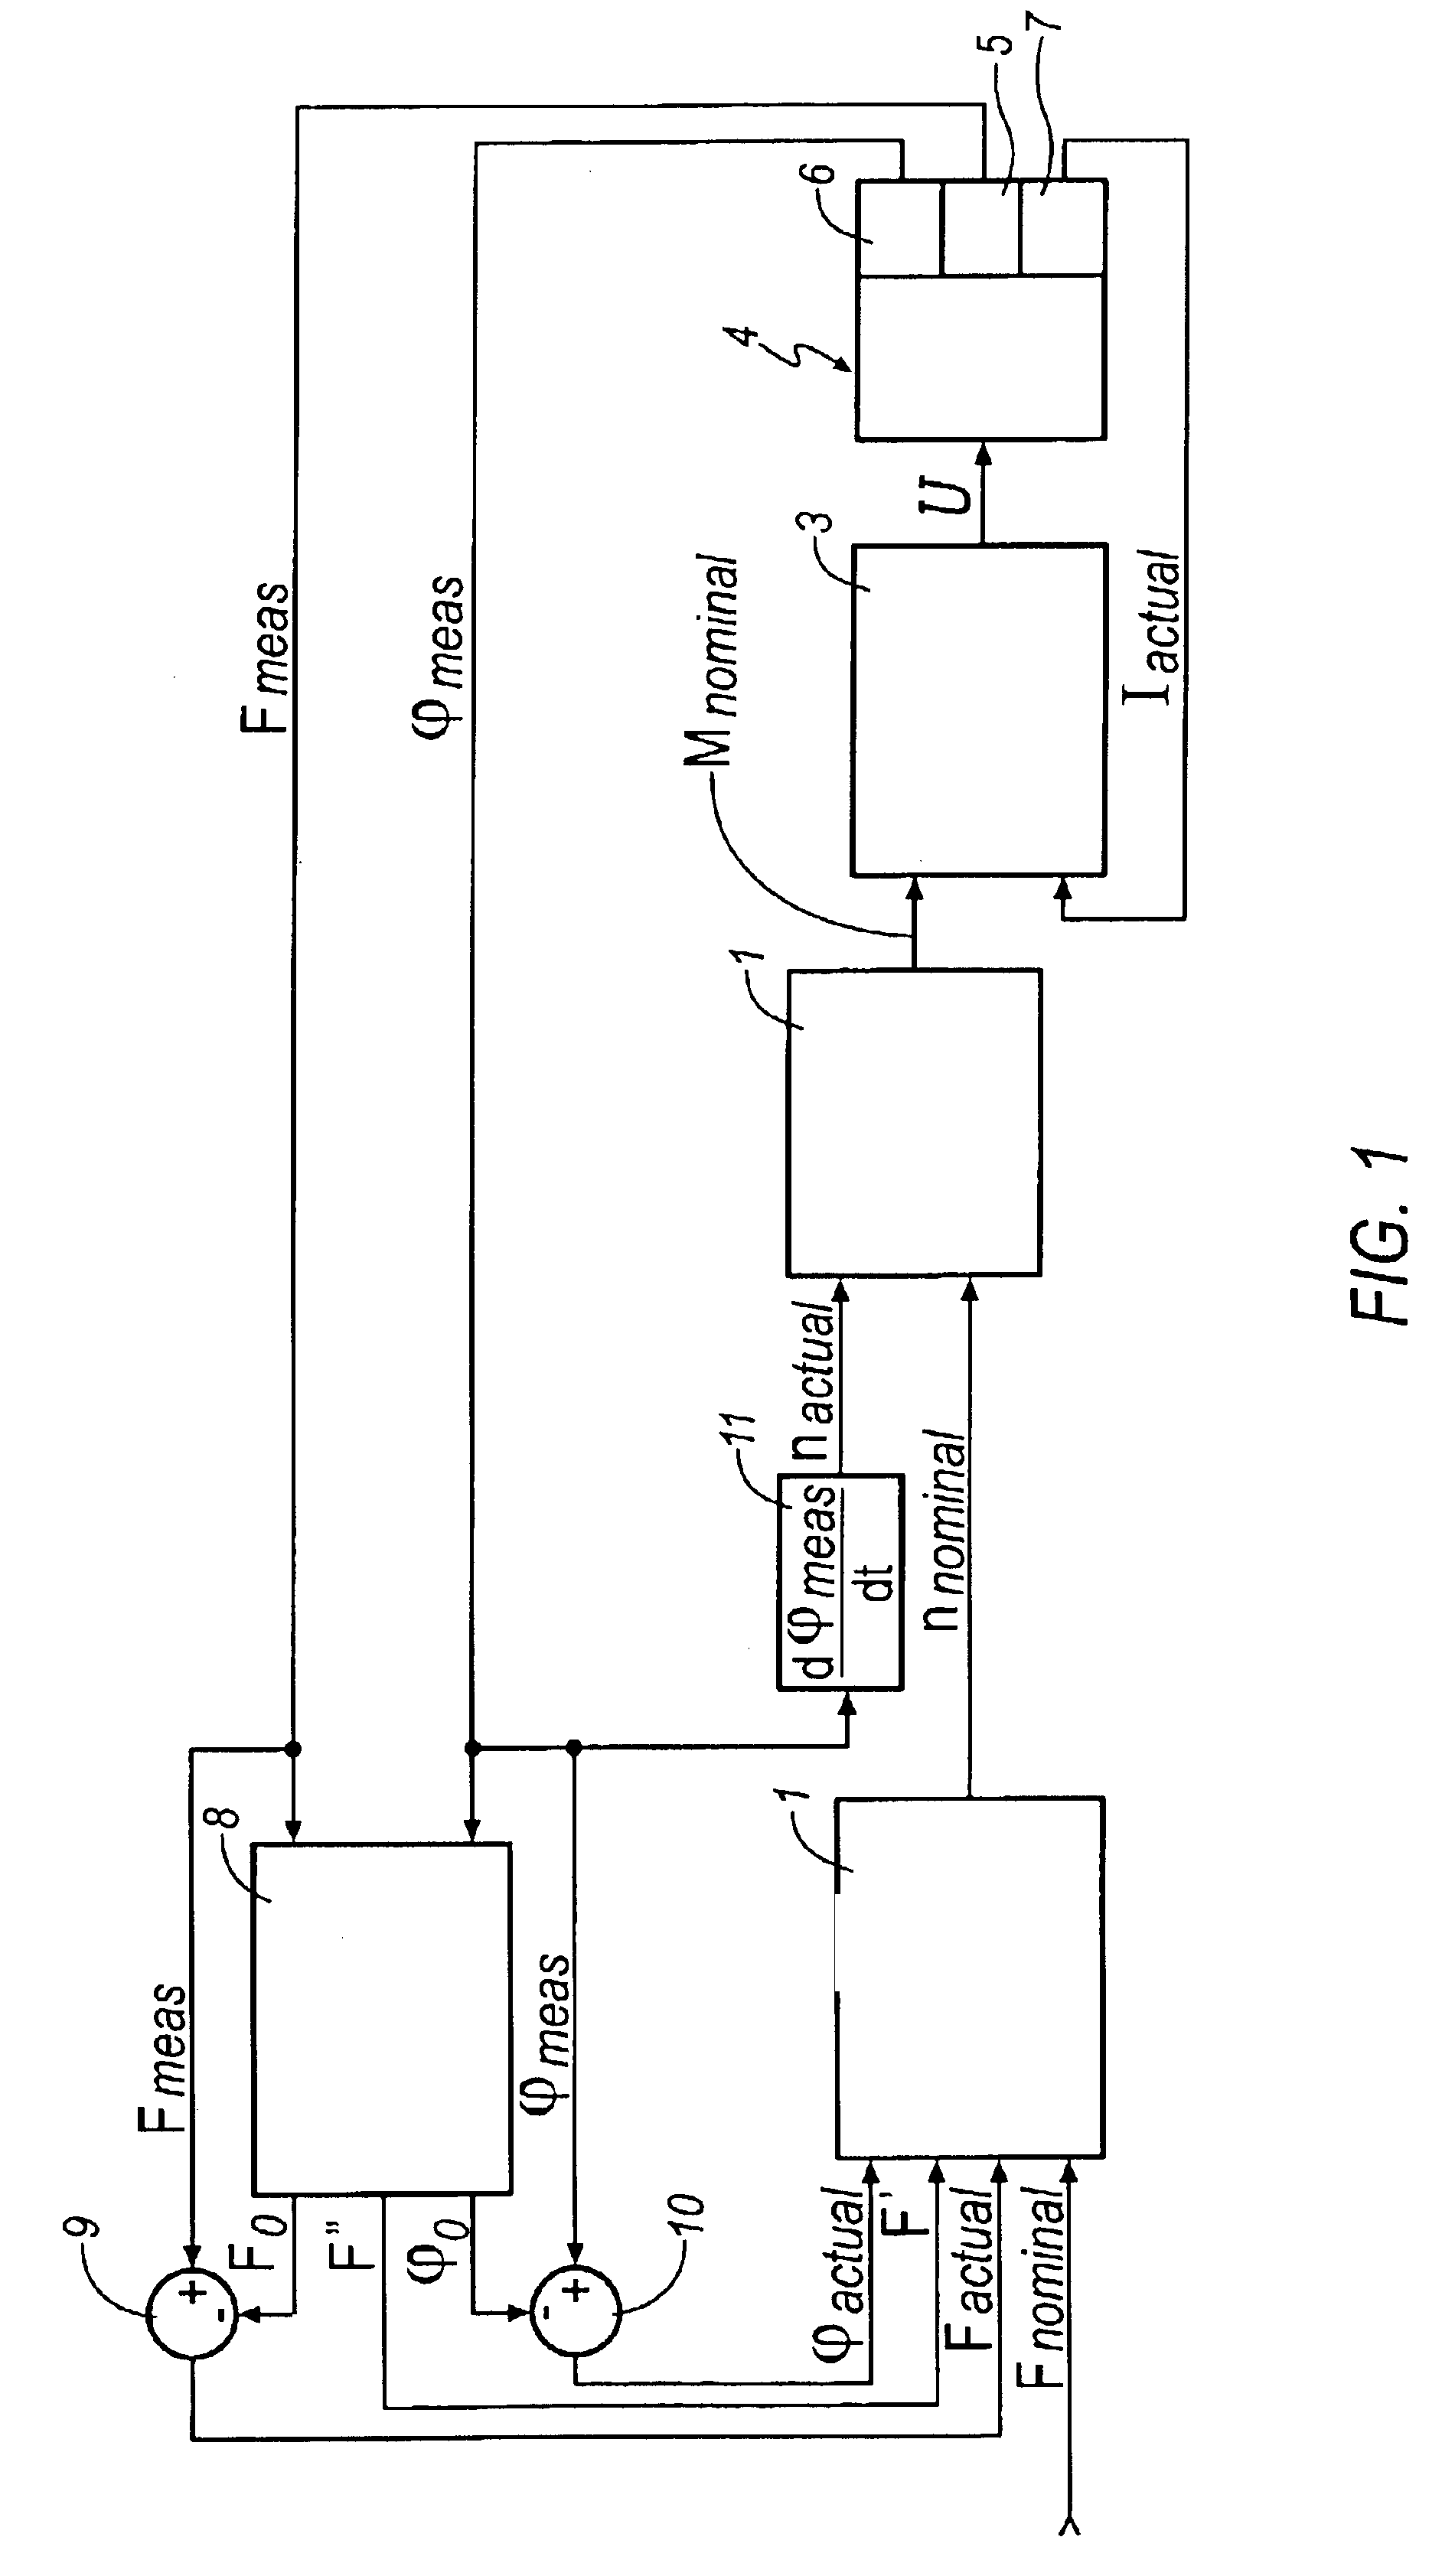 Method and control system for applying defined clamping forces